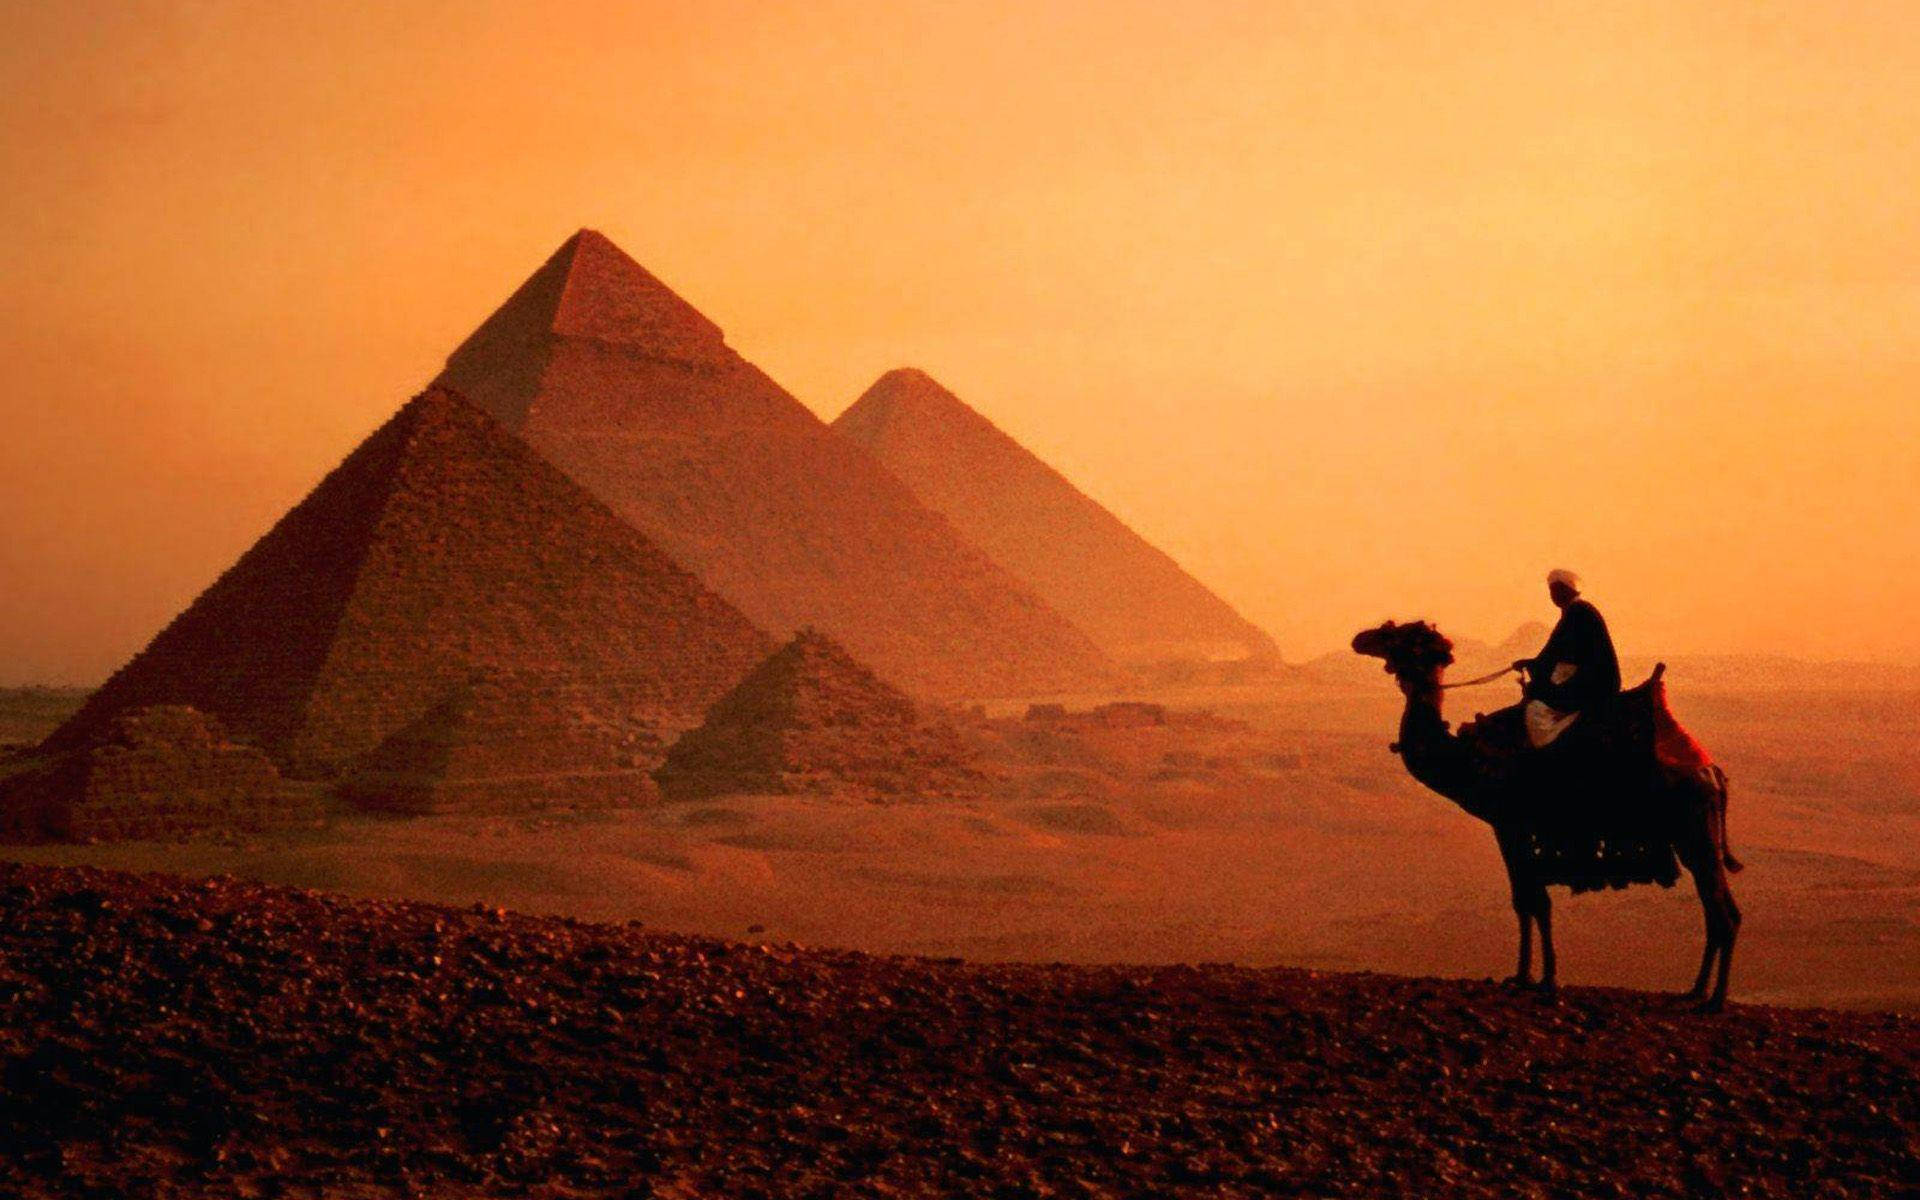 Cairo Historical Pyramids In Sunset Wallpaper